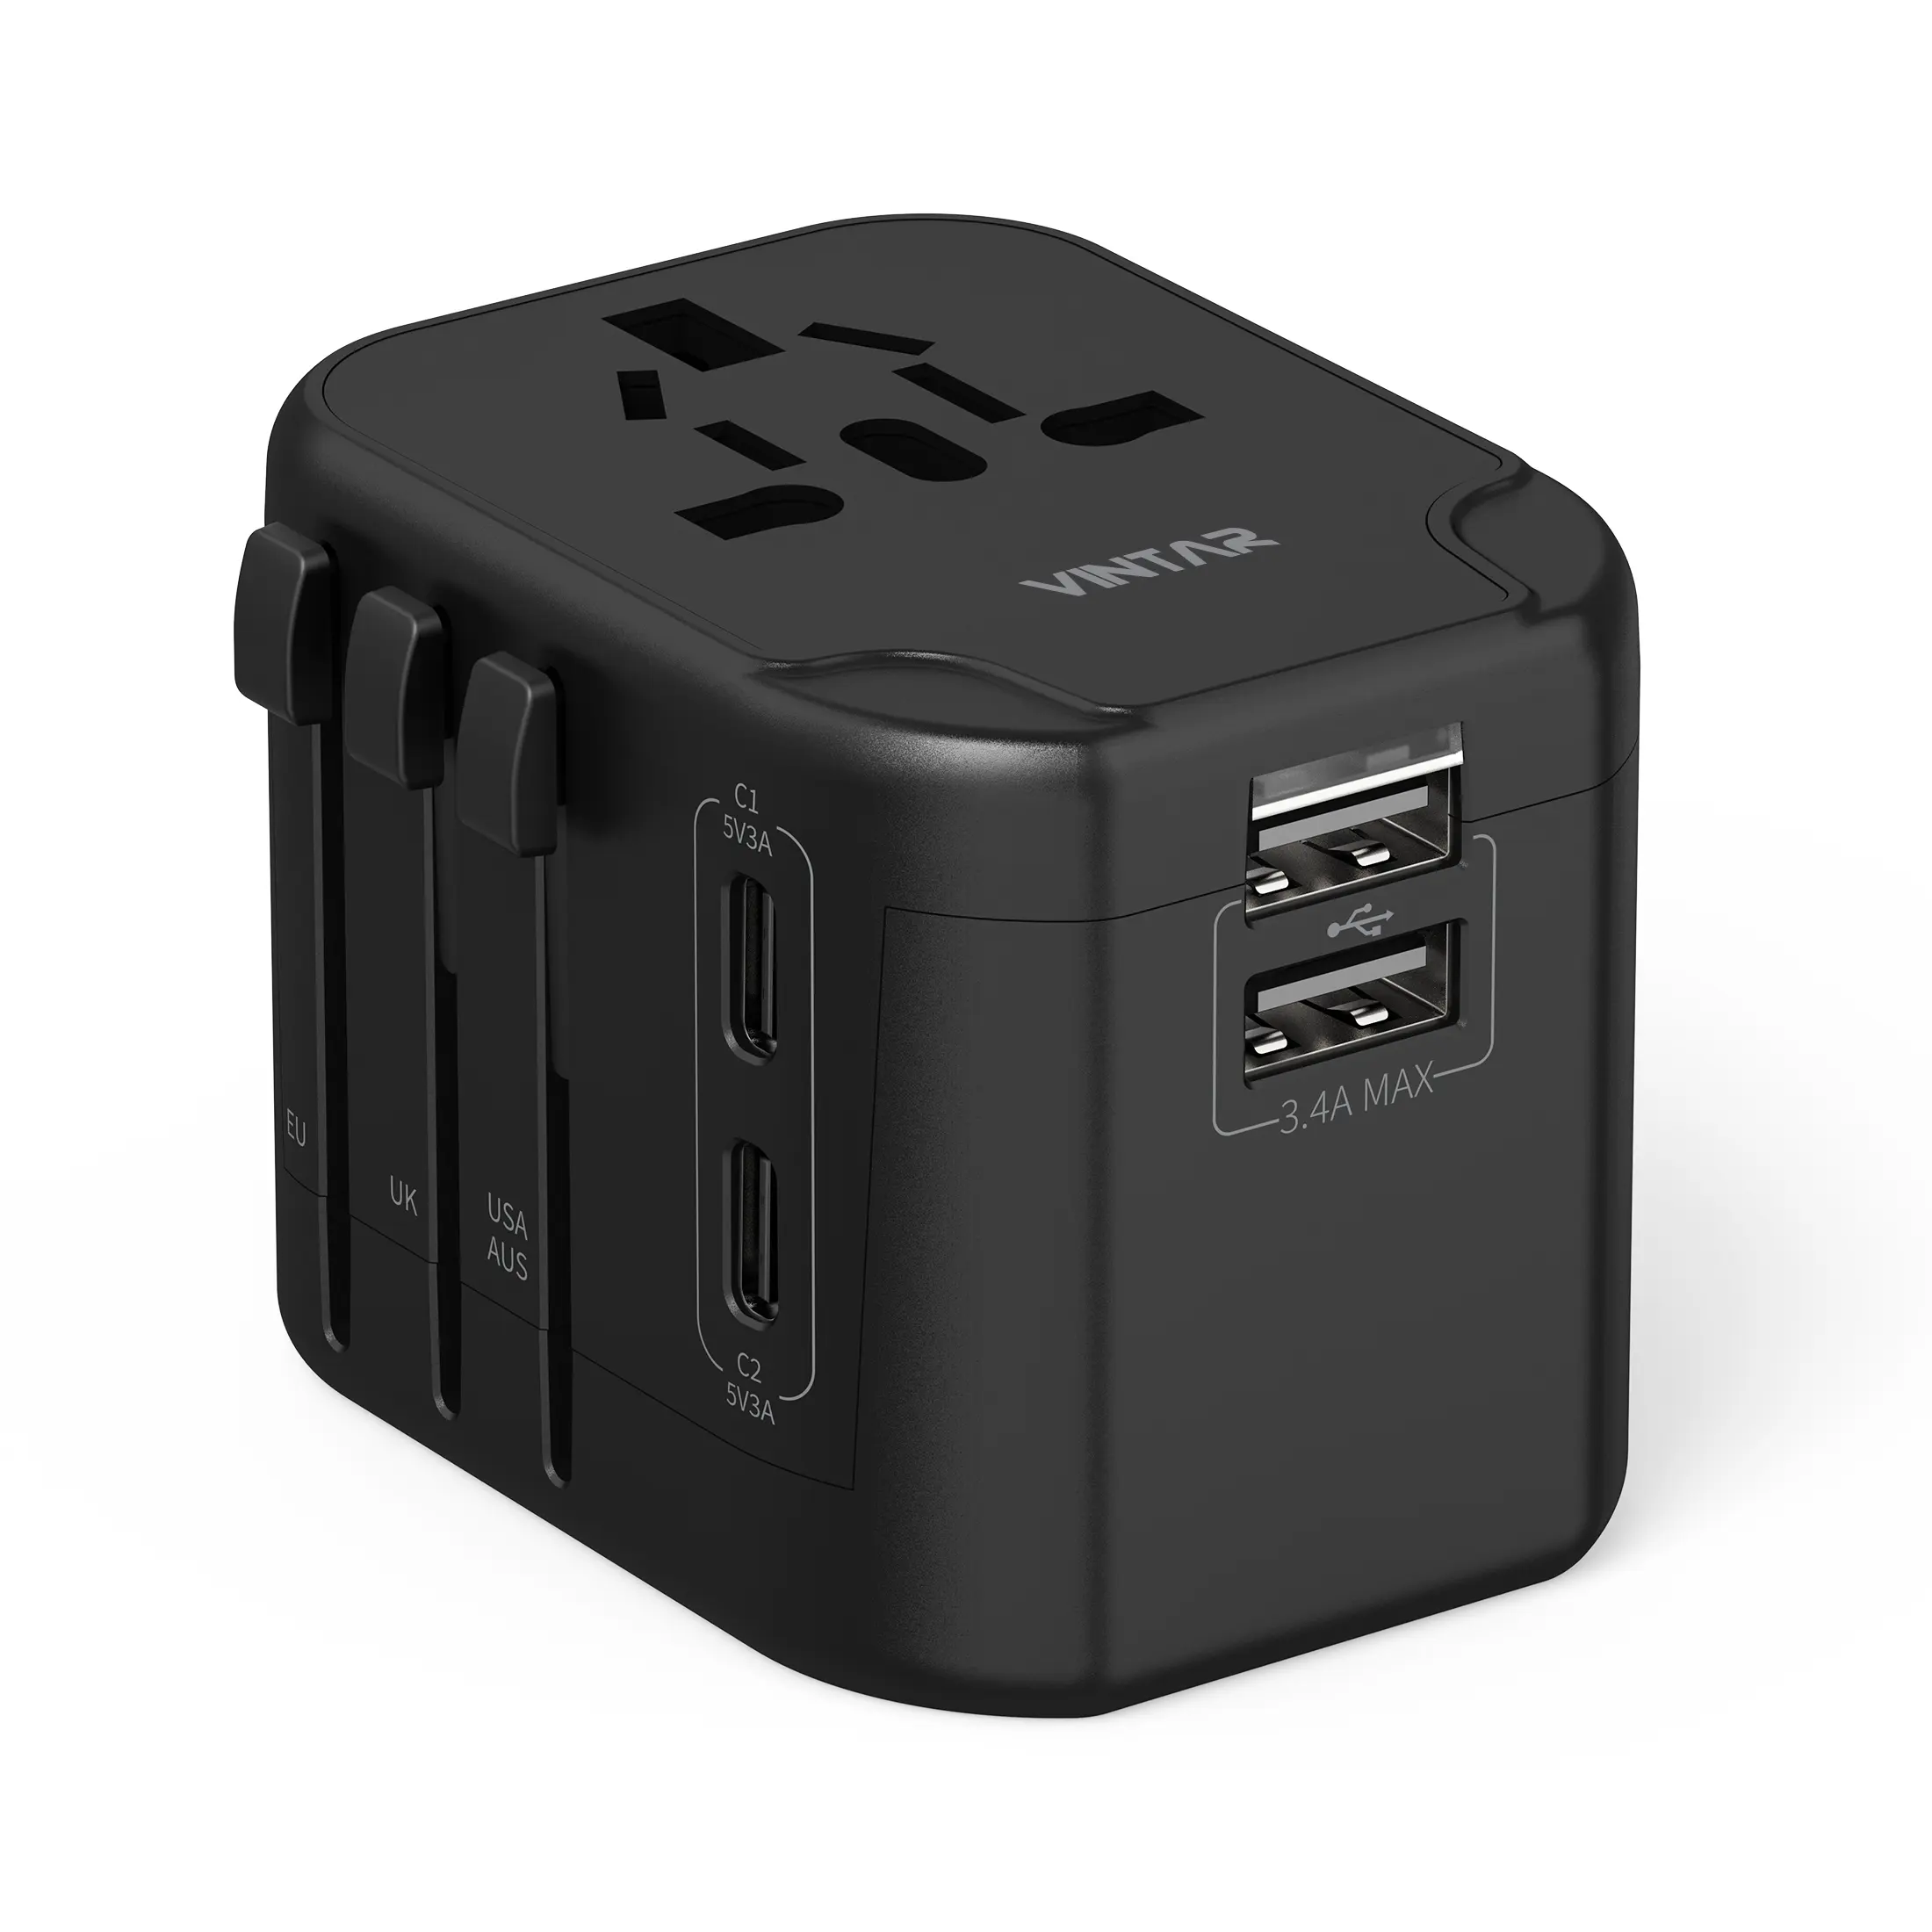 Universal Travel Adapter  VINTAR International Plug Adapter with 2 USB C and 2 USB Ports  Travel Essentials Power Adapter